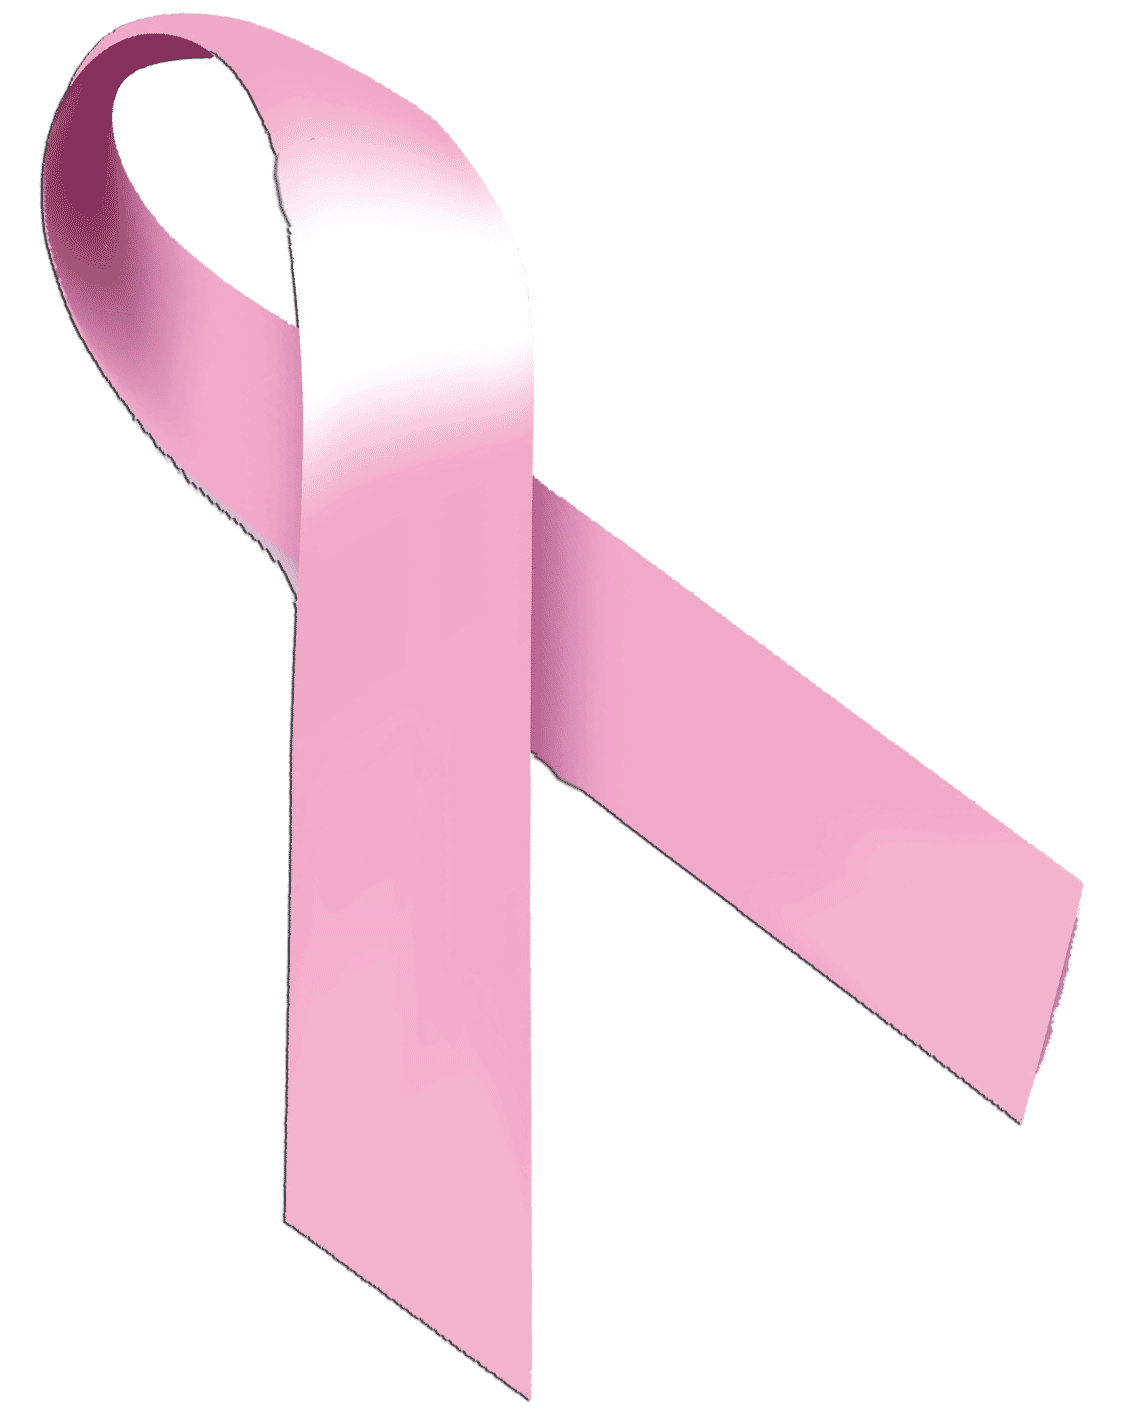 Cancer Ribbon Bow PNG Image Background